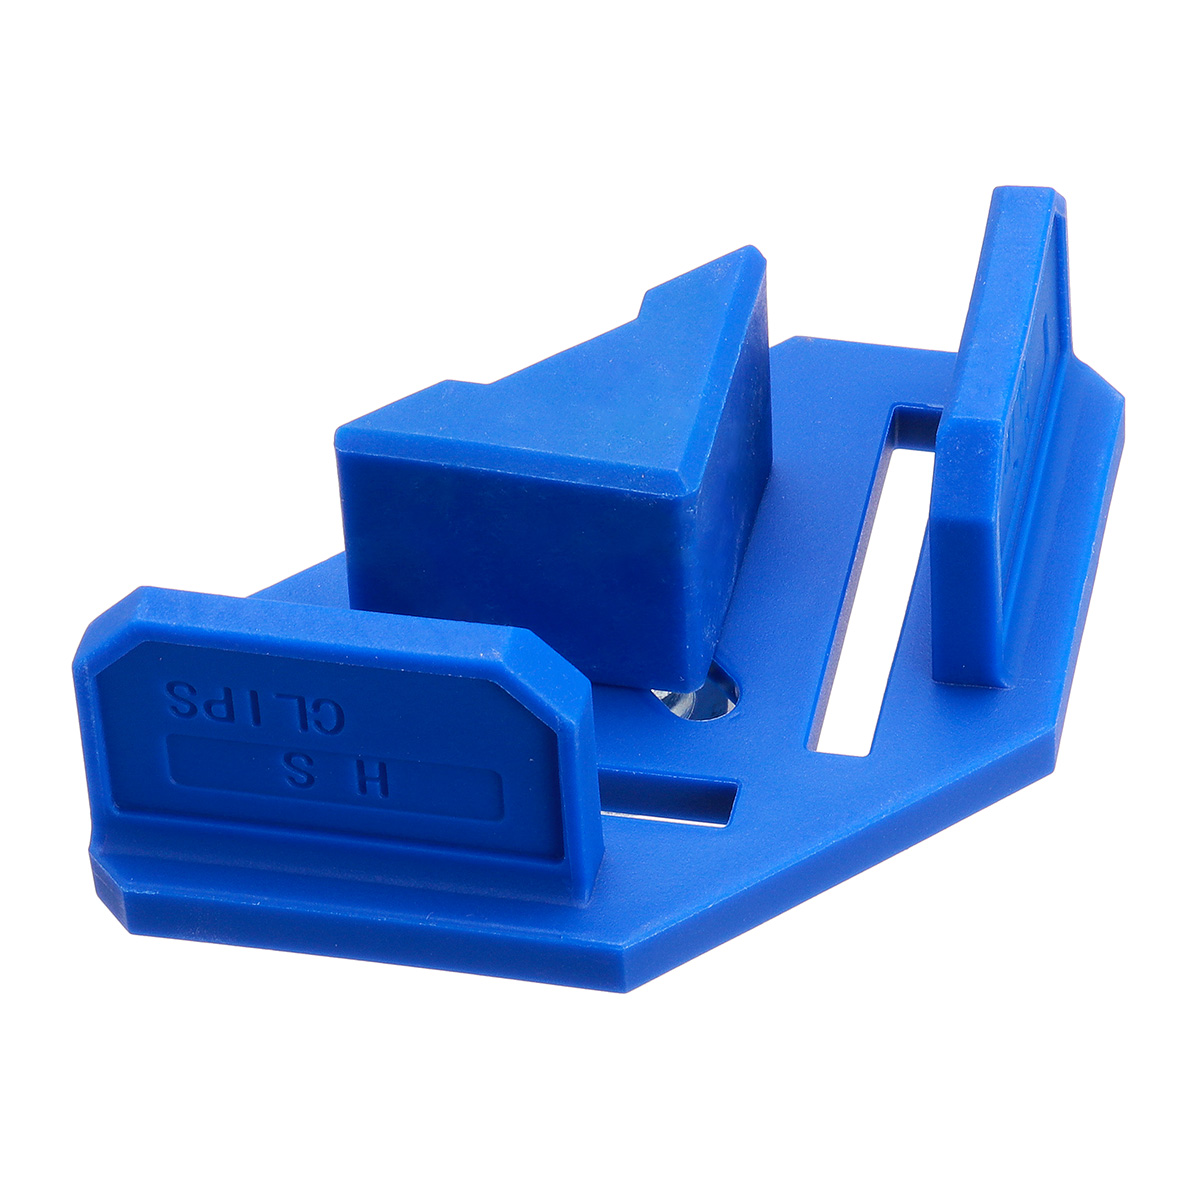 4pcs-Adjustable-Right-Angle-Positioning-Clamp-767642mm-Woodworking-Corner-Clamp-Right-Clips-DIY-Fixt-1889370-3